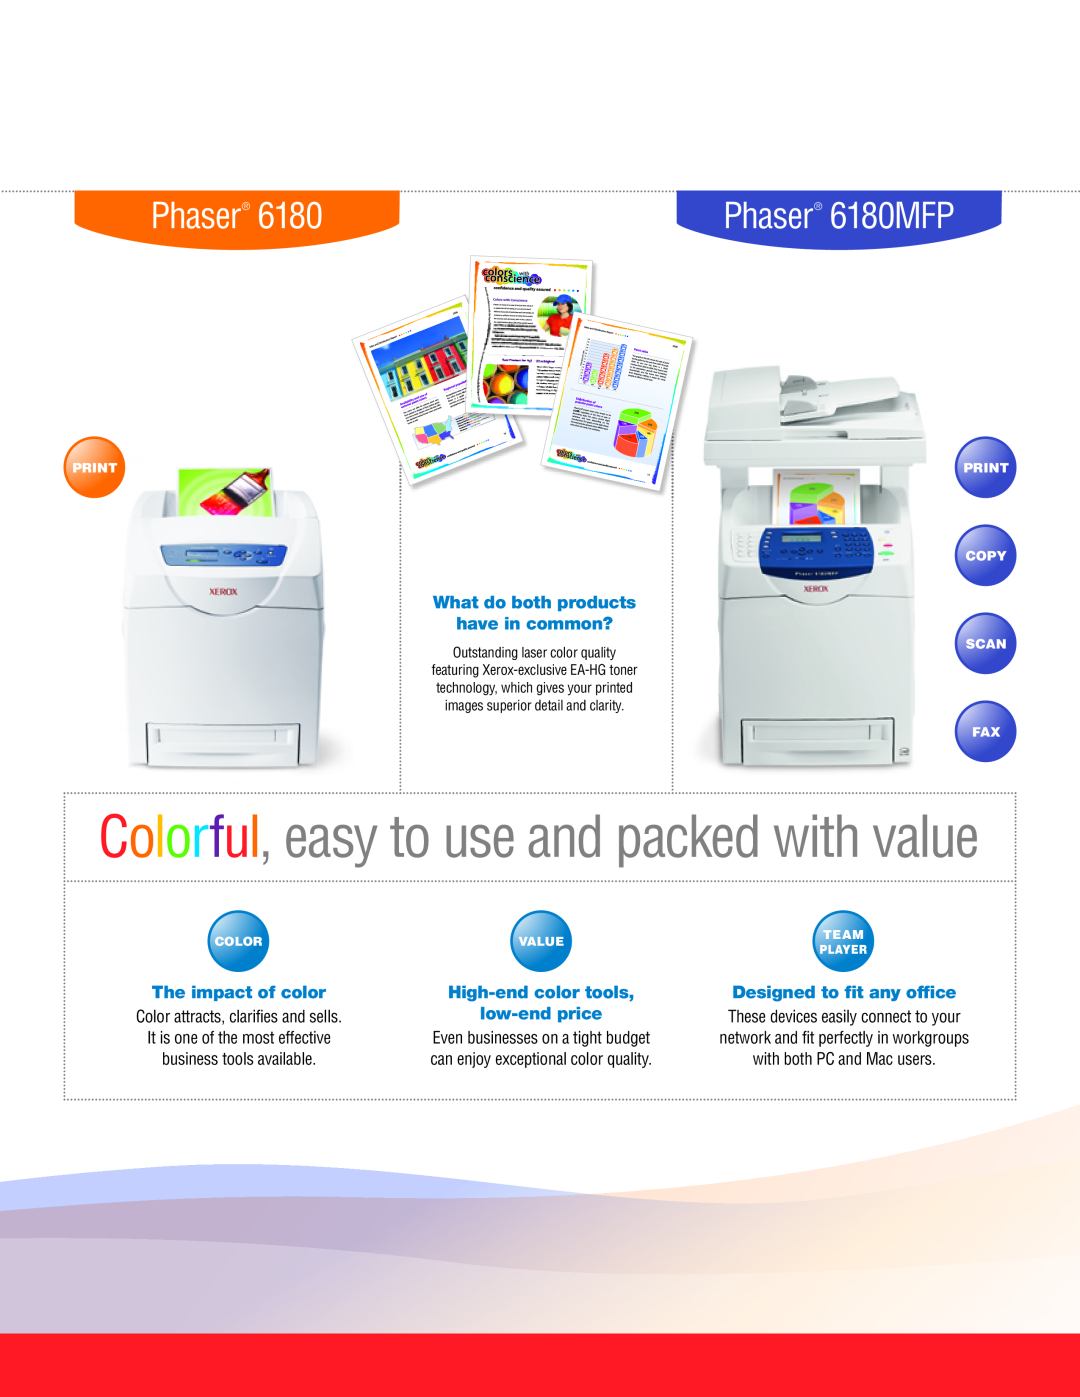 Xerox Colorful, easy to use and packed with value, Phaser 6180MFP, What do both products have in common?, Print 